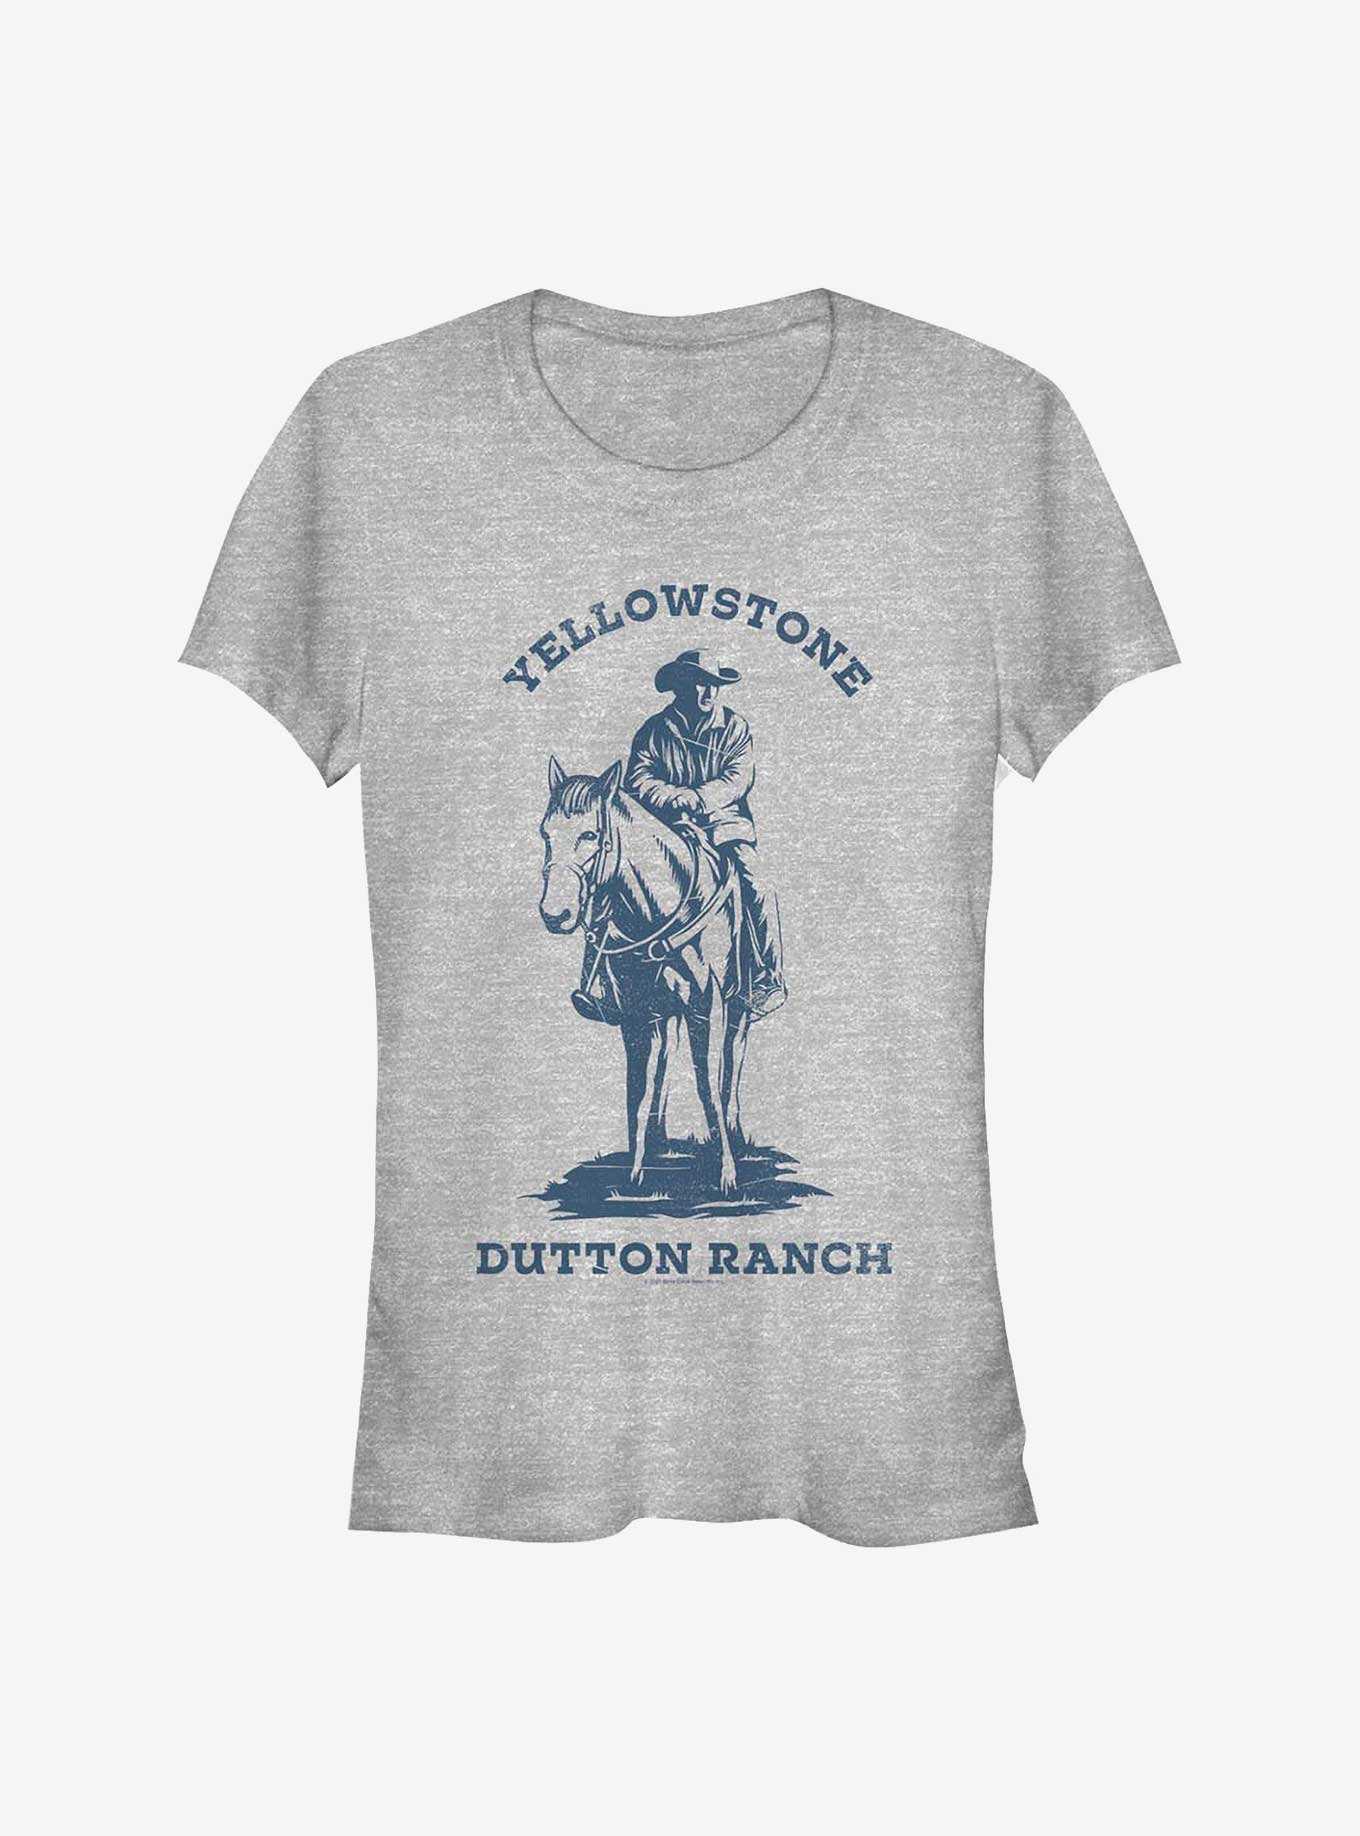 Yellowstone Dutton Ranch Distressed Sign Girls T-Shirt, , hi-res